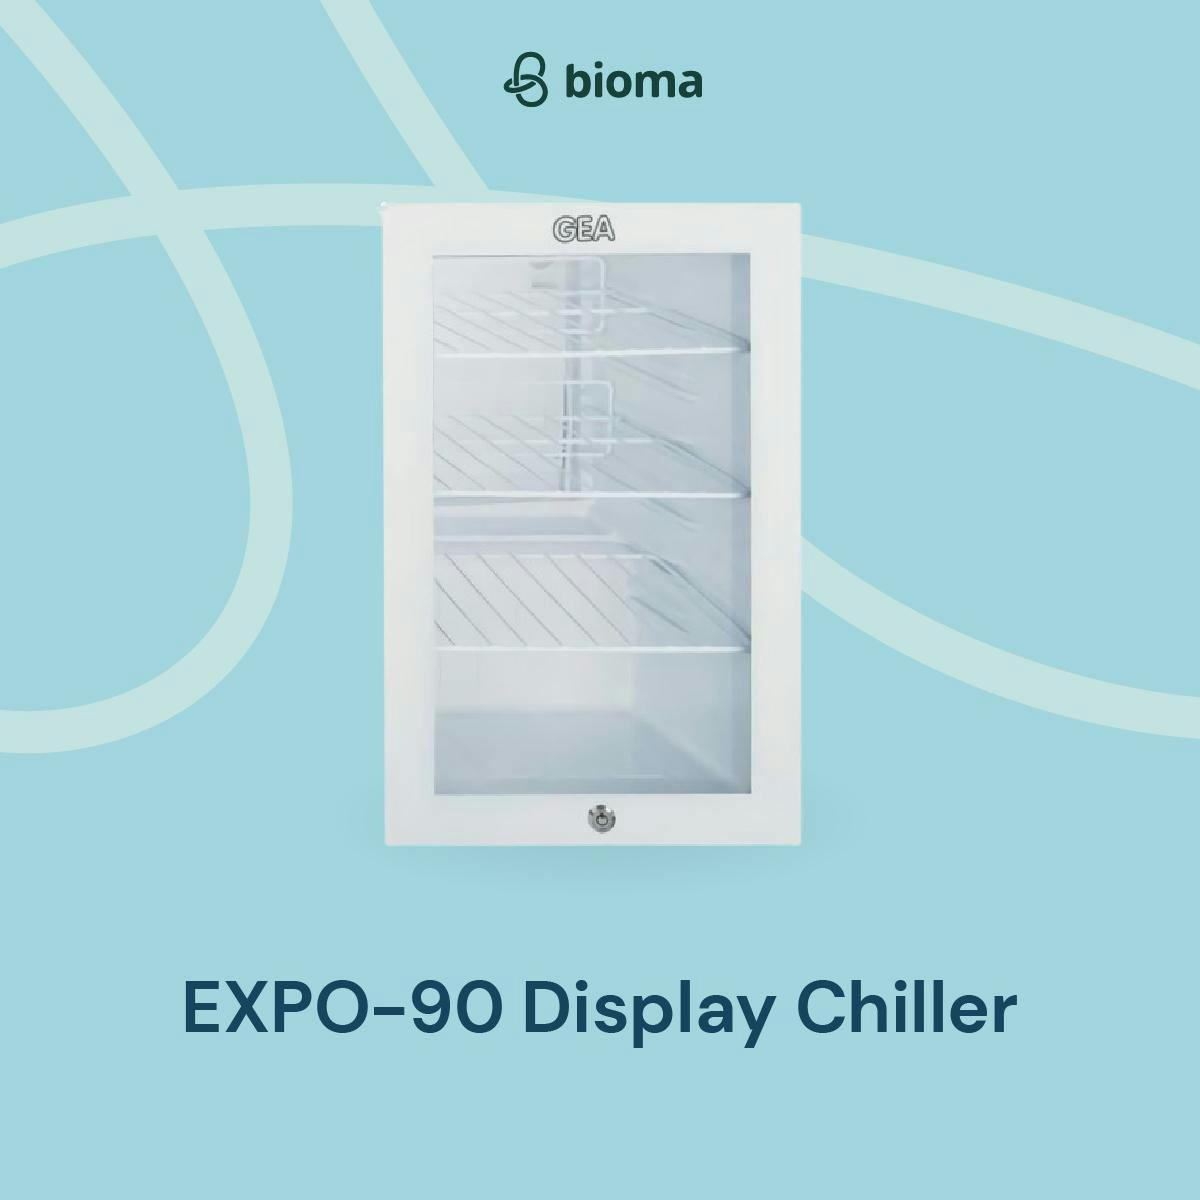 EXPO-90 Display Chiller